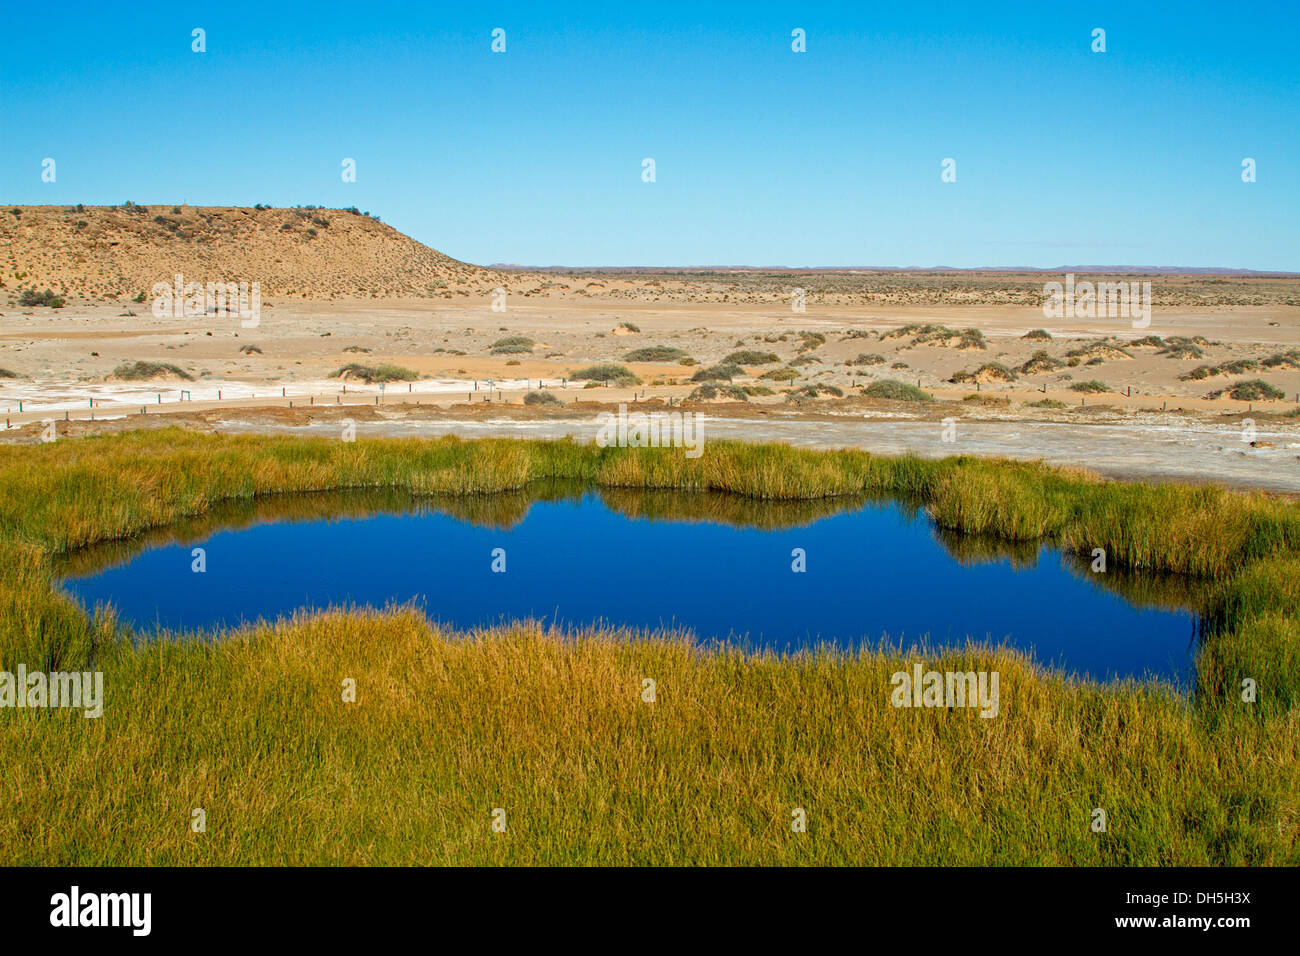 Landscape with blue waters and reeds of Blanche Cup mound spring, oasis in outback plains near Oodnadatta track South Australia Stock Photo